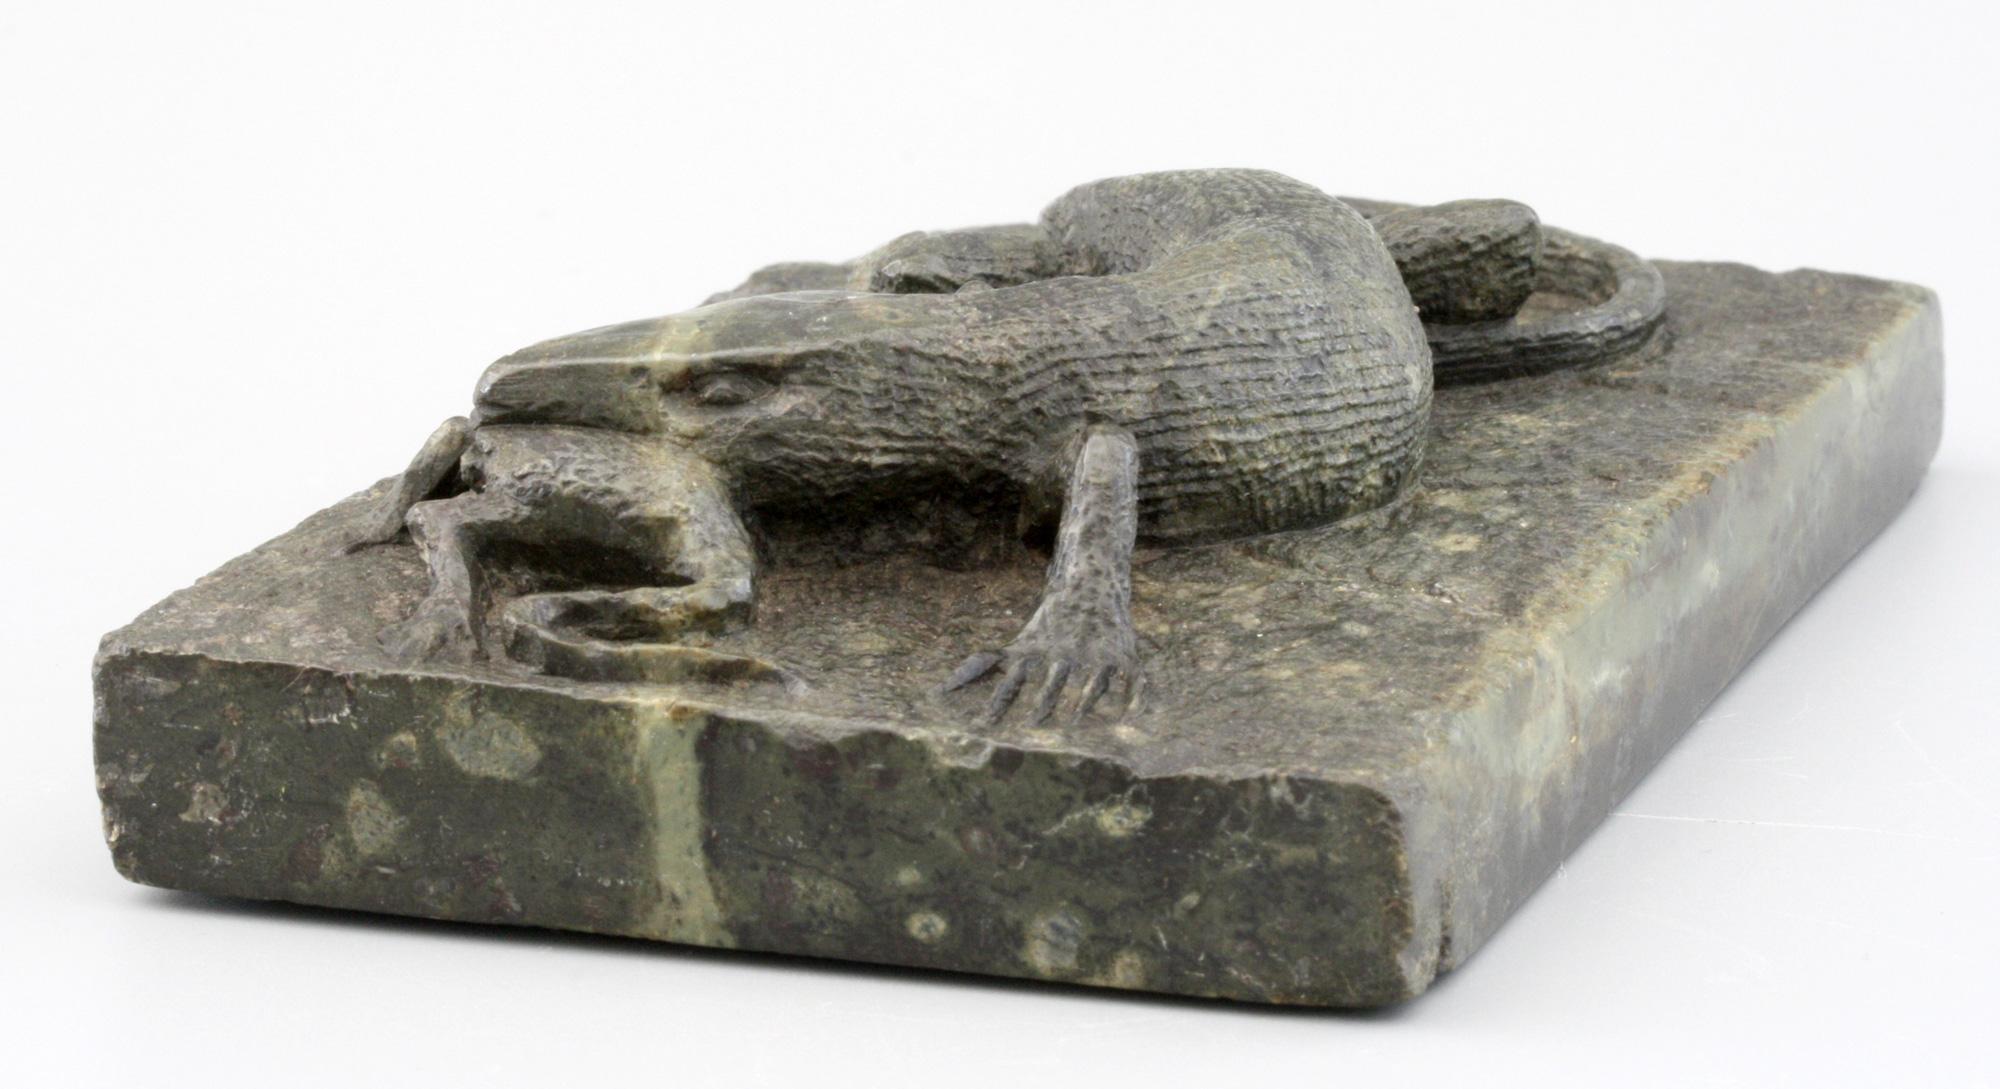 A superb antique carved stone sculptural desk weight modeled as a lizard with its prey dating from the 19th century. Carved from a single piece of rectangular shaped stone the lizard is carved holding its prey in its mouth and stands on a flat